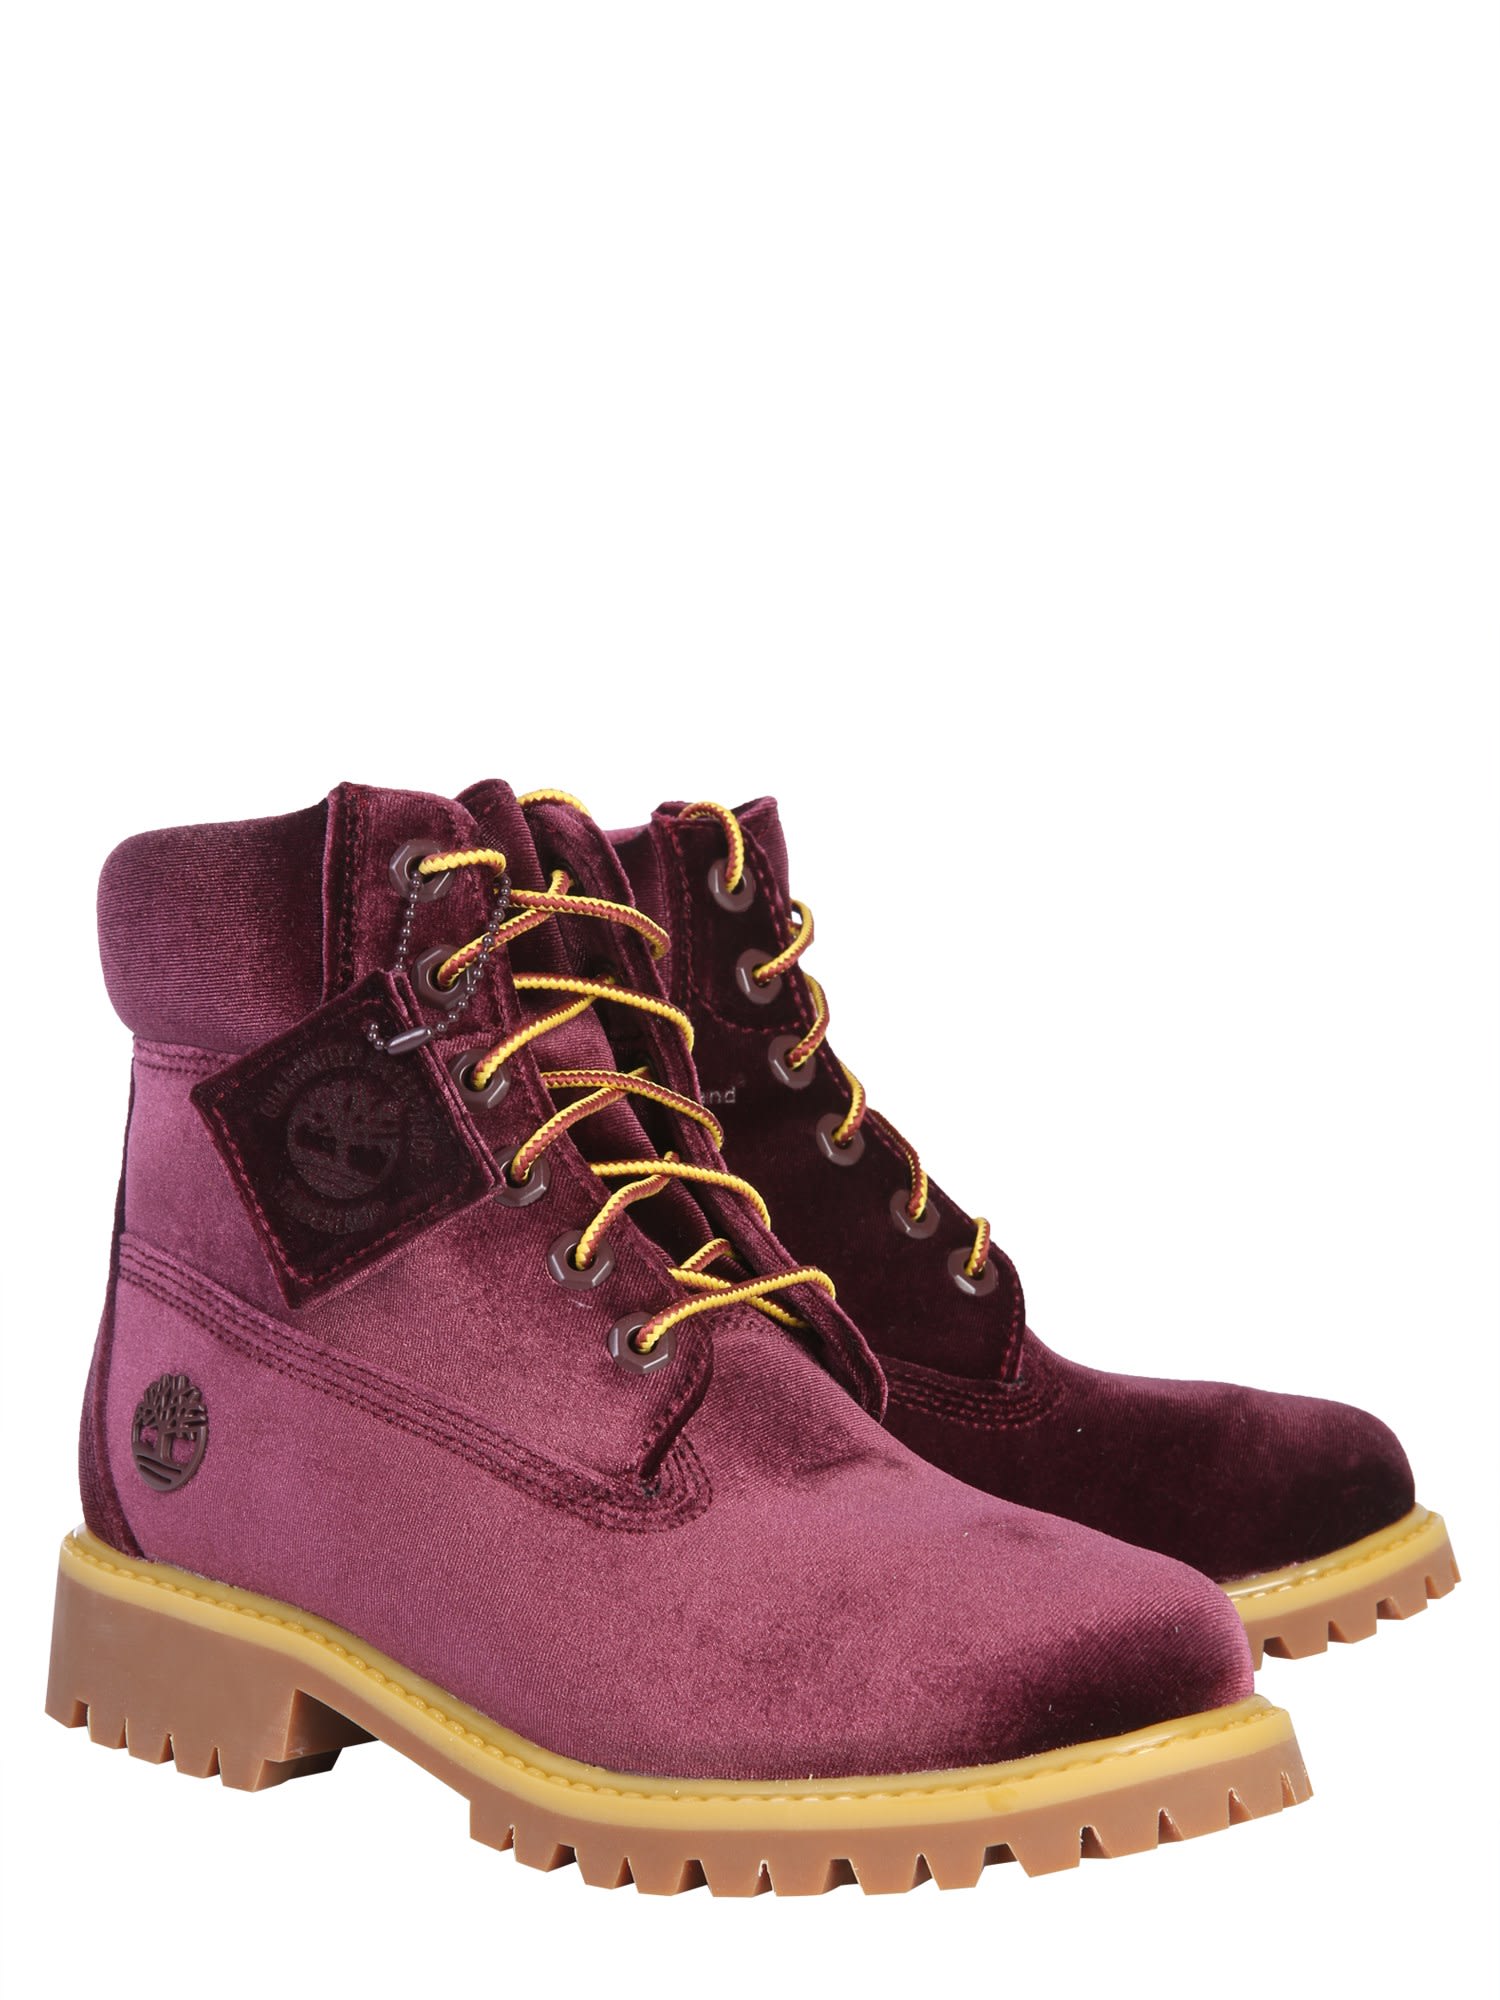 Off-White Off-White Timberland Maroon Boots - BORDEAUX - 10776114 | italist